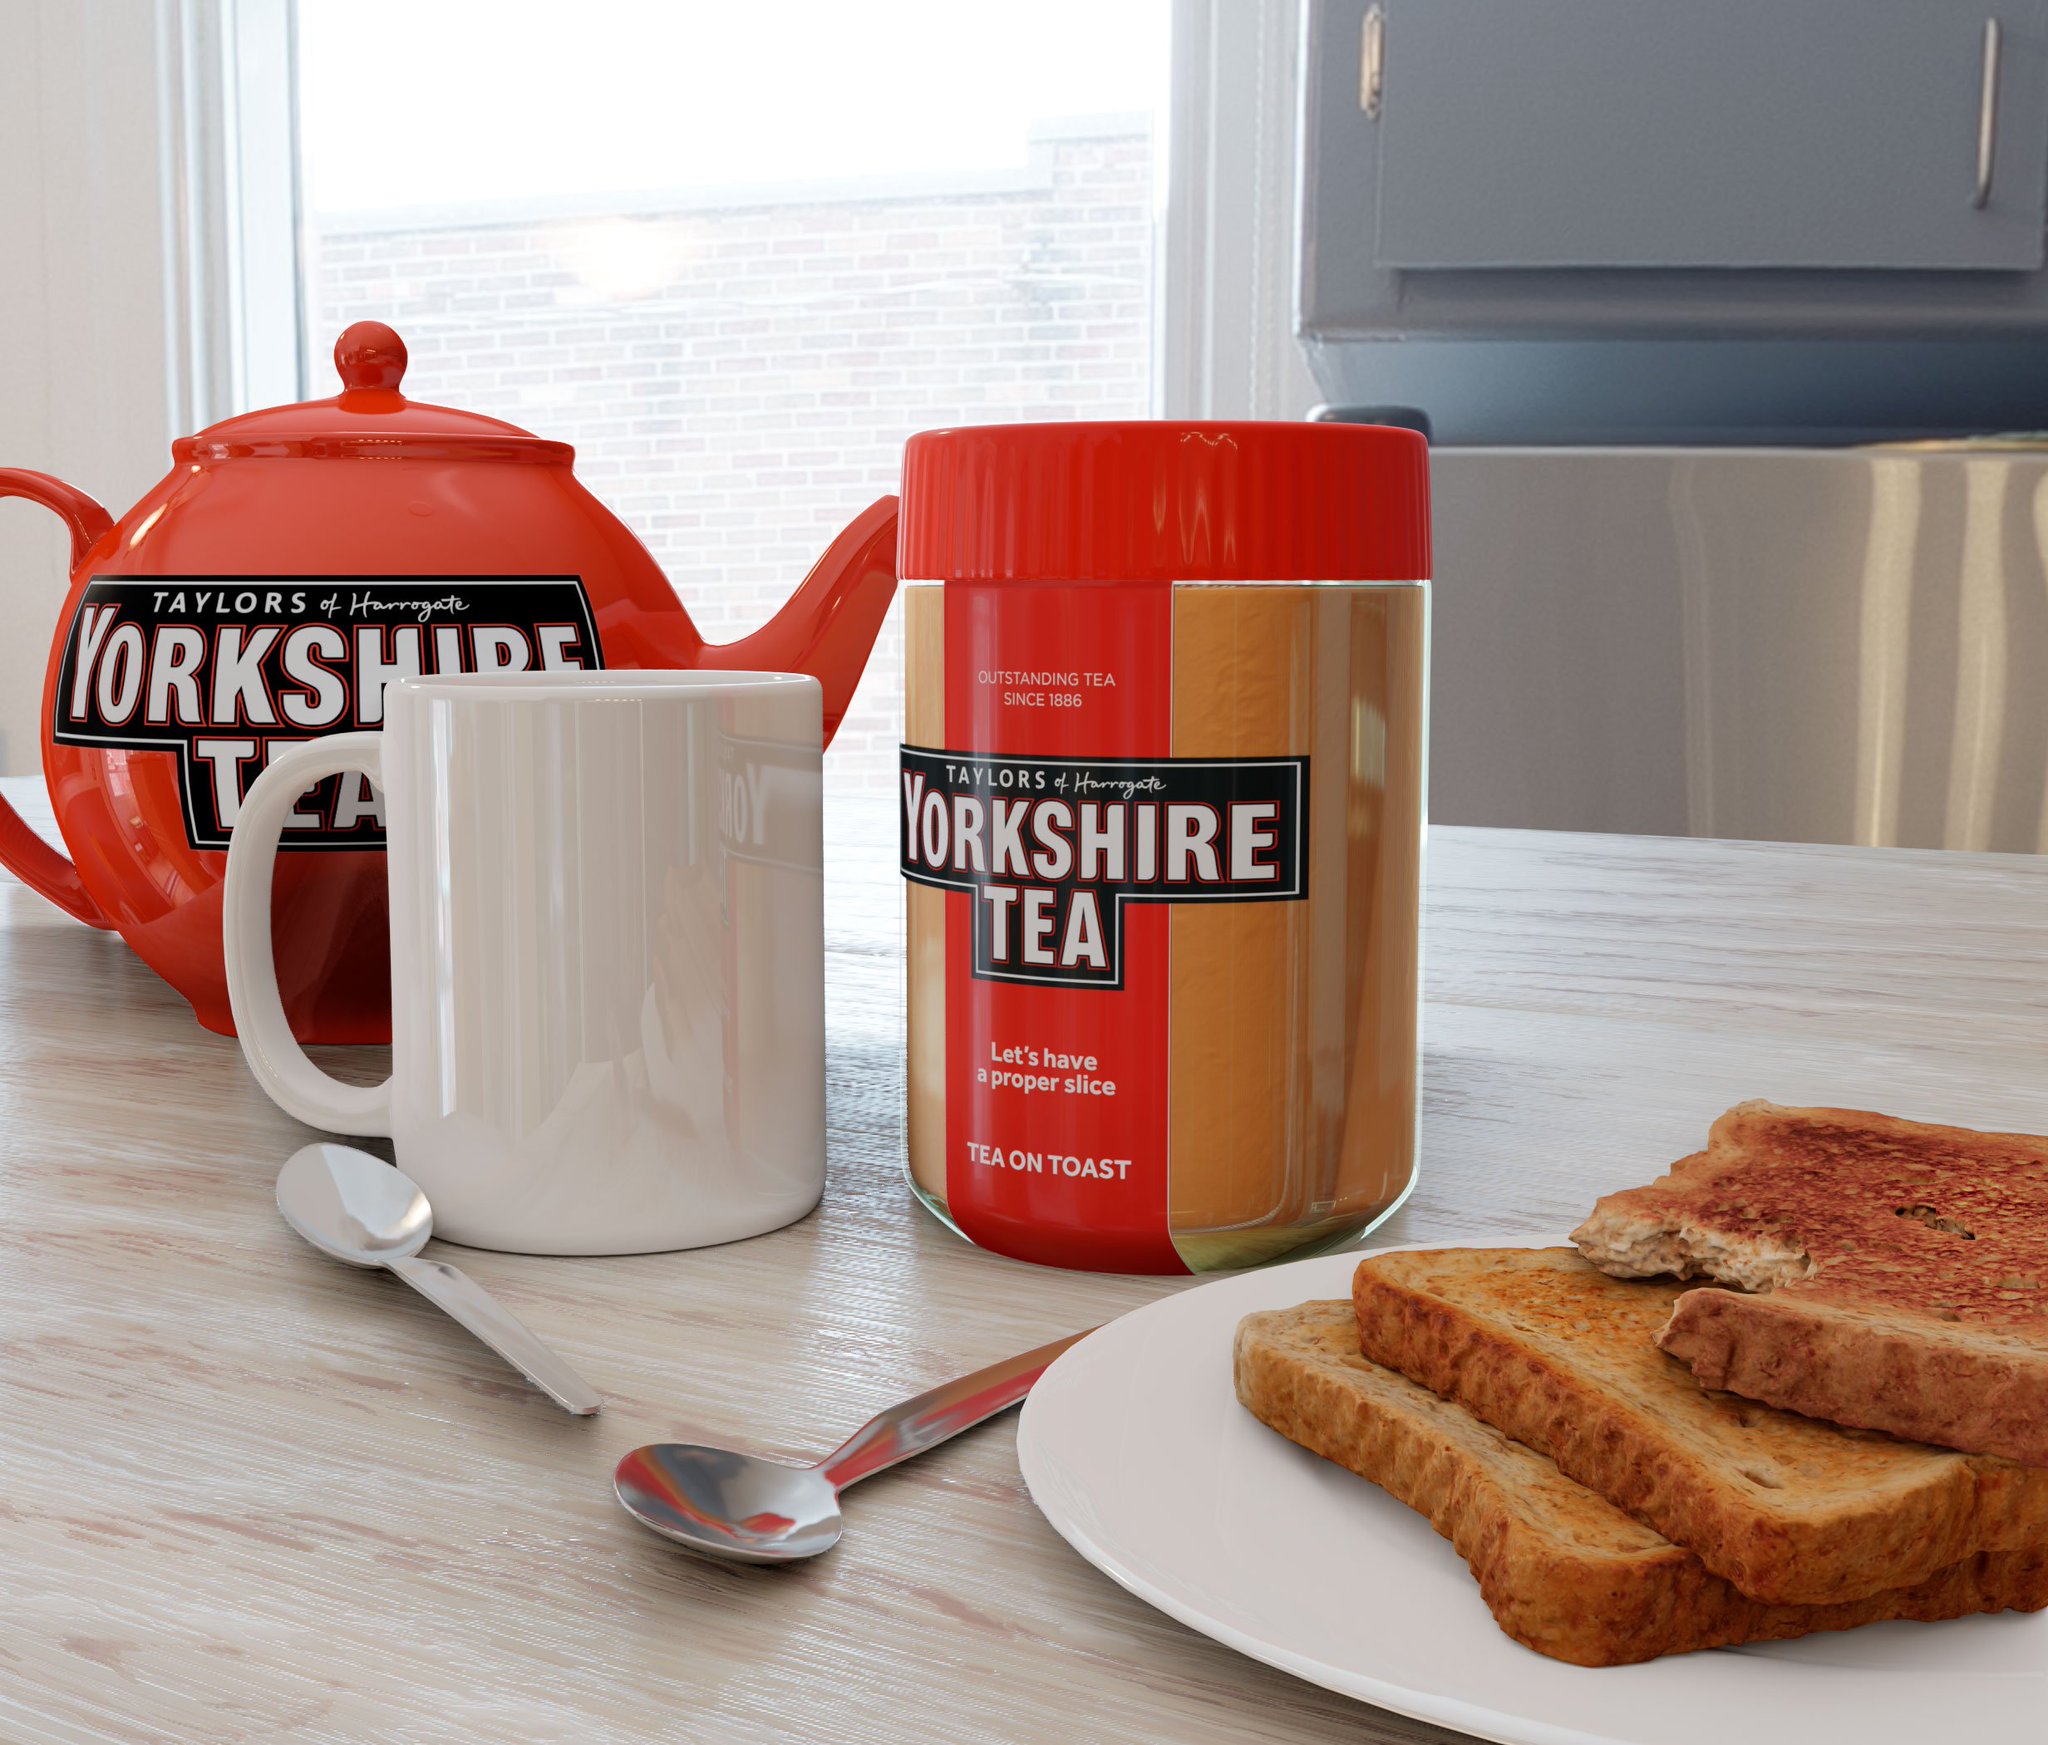 Yorkshire Tea on X: Legend has it that grasping 1440 Yorkshire